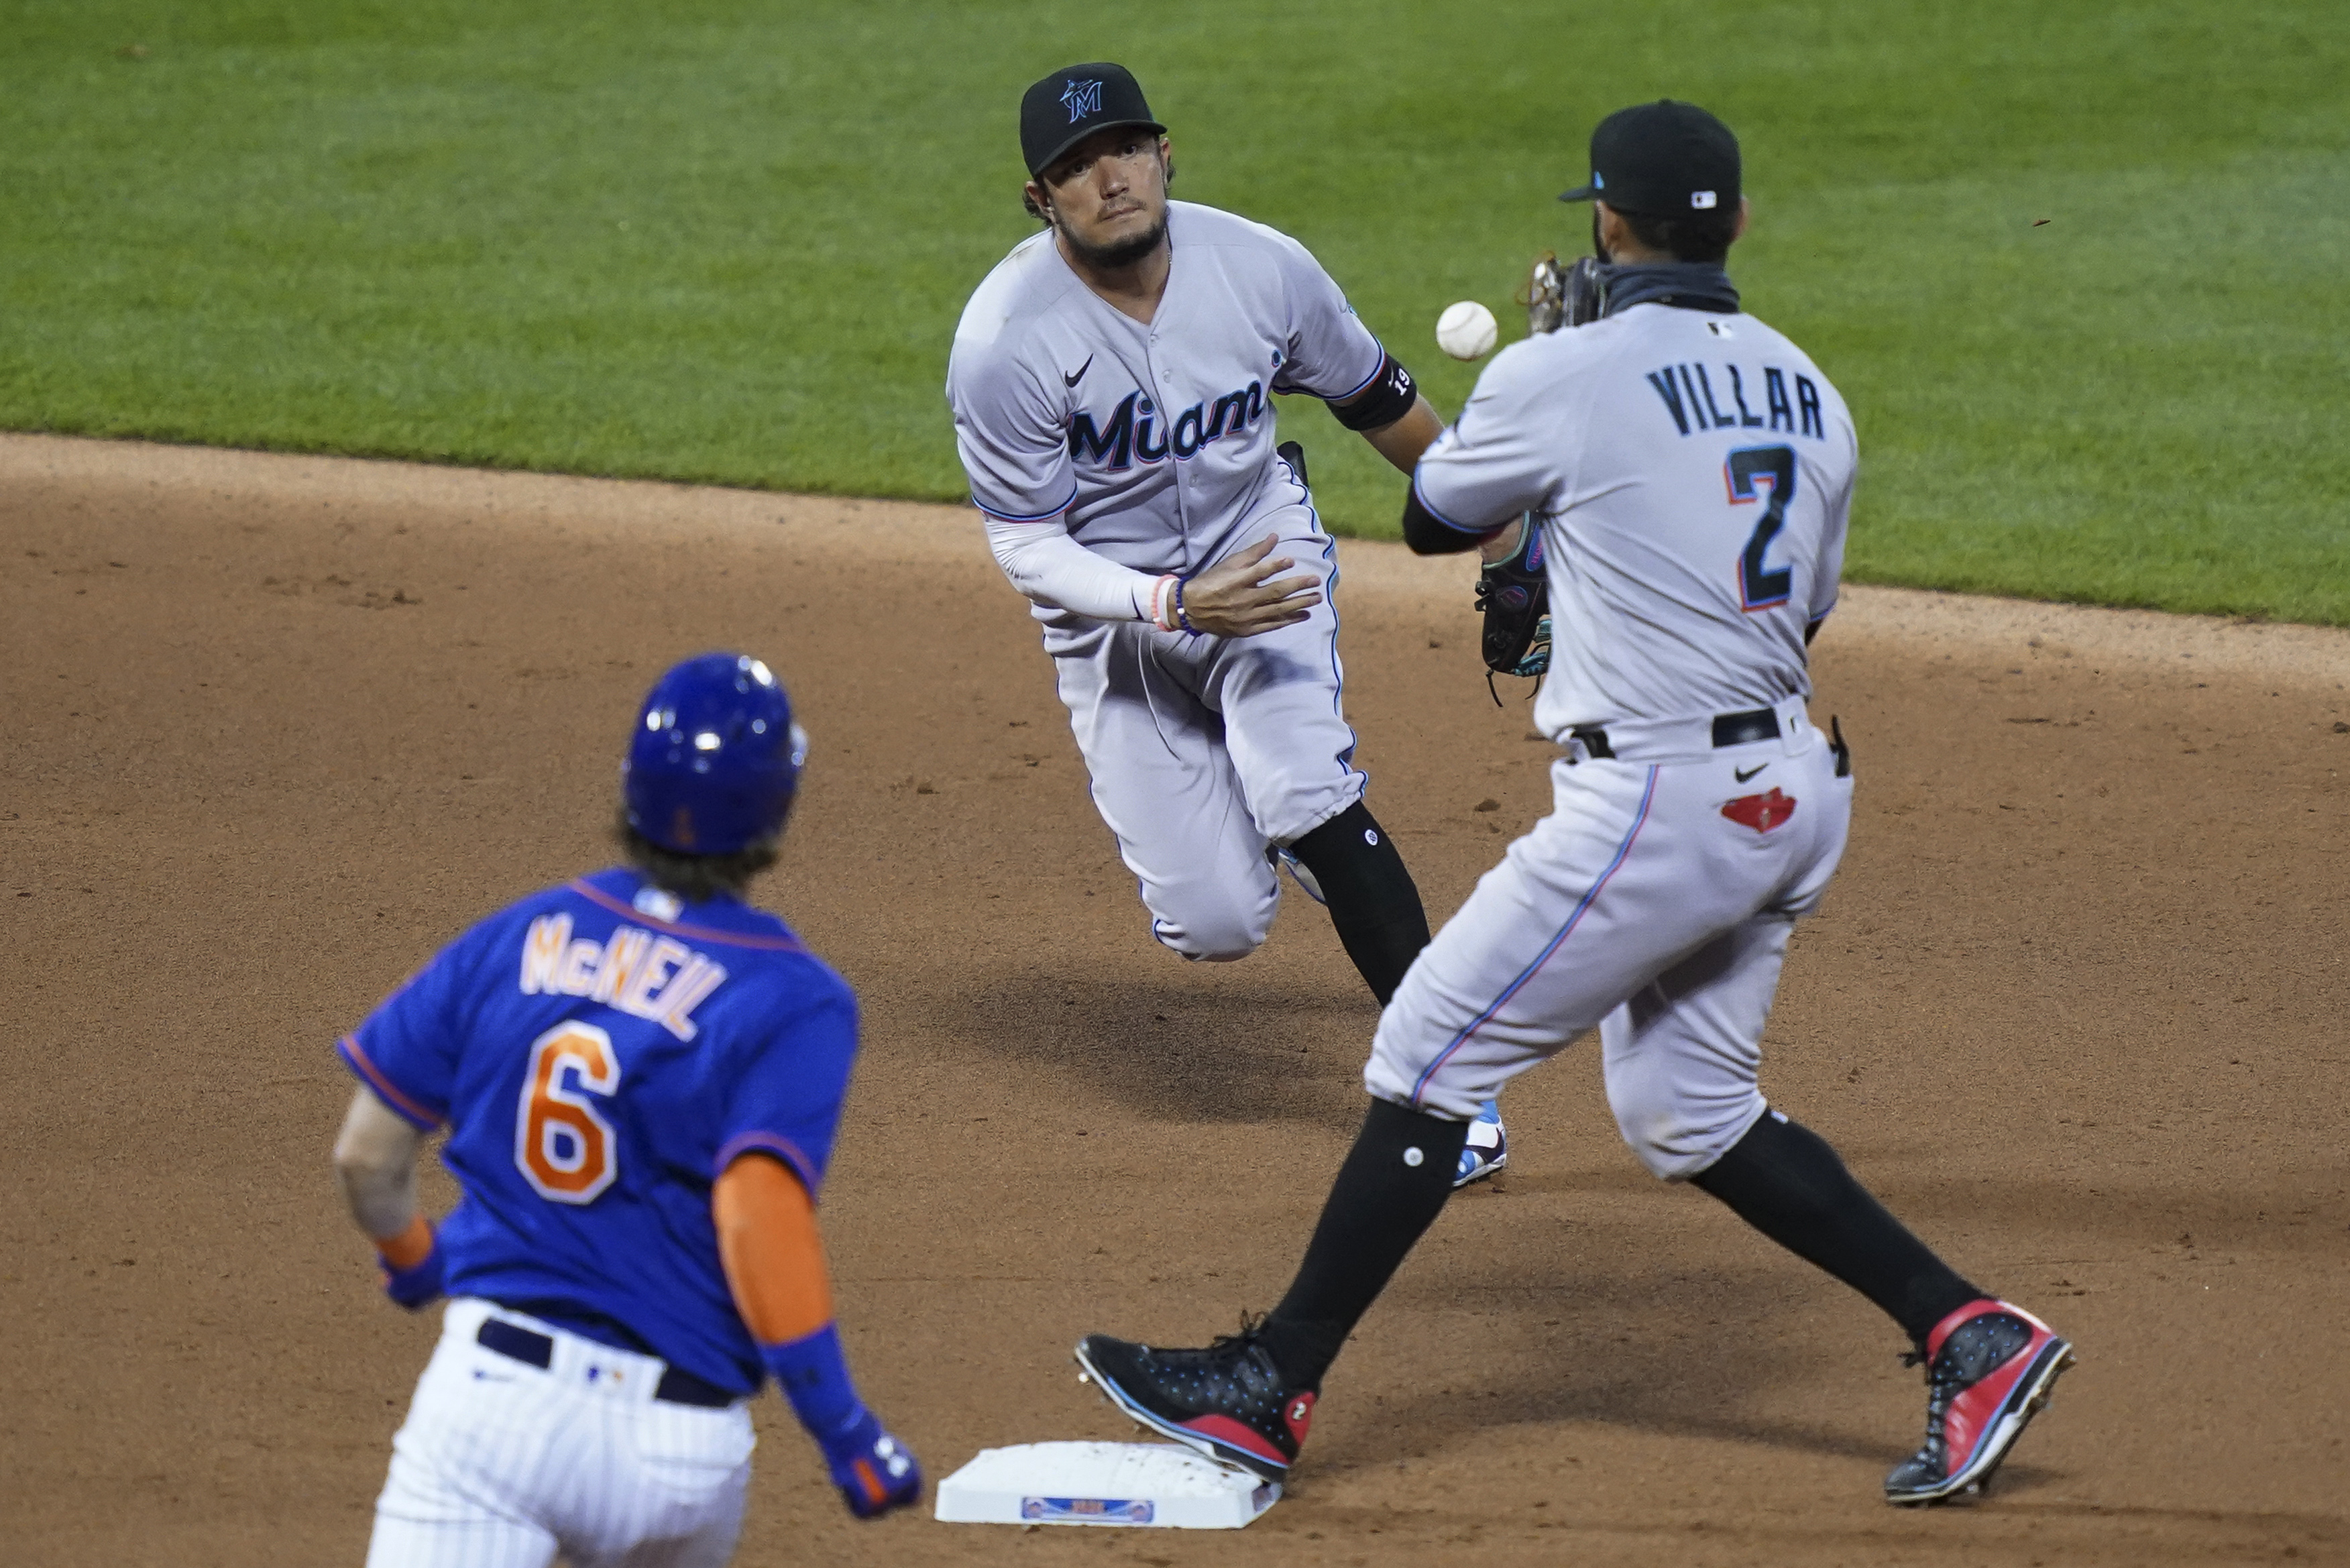 Marlins break through late for doubleheader split with Mets - CBS New York